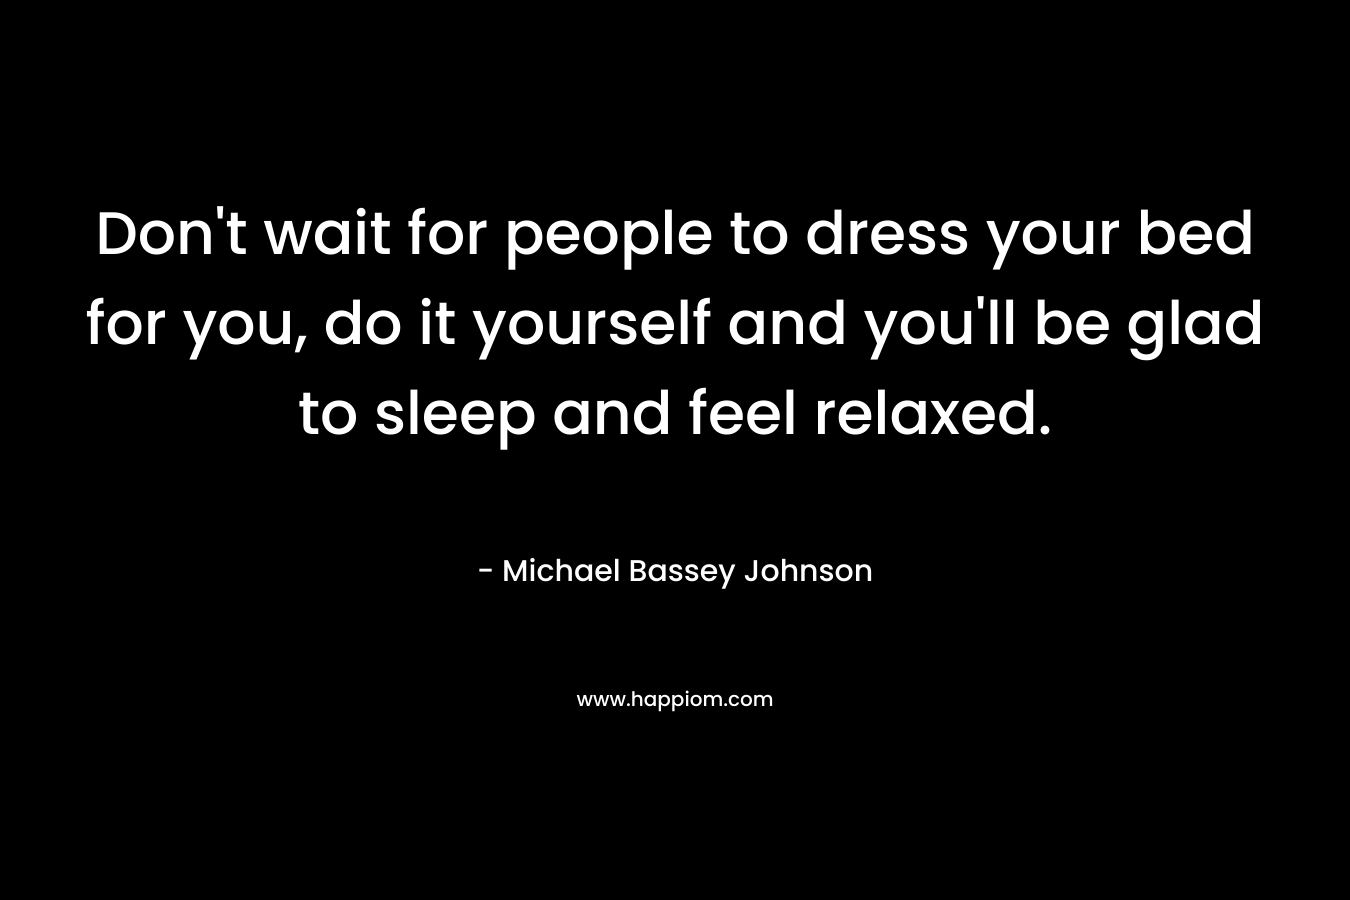 Don't wait for people to dress your bed for you, do it yourself and you'll be glad to sleep and feel relaxed.